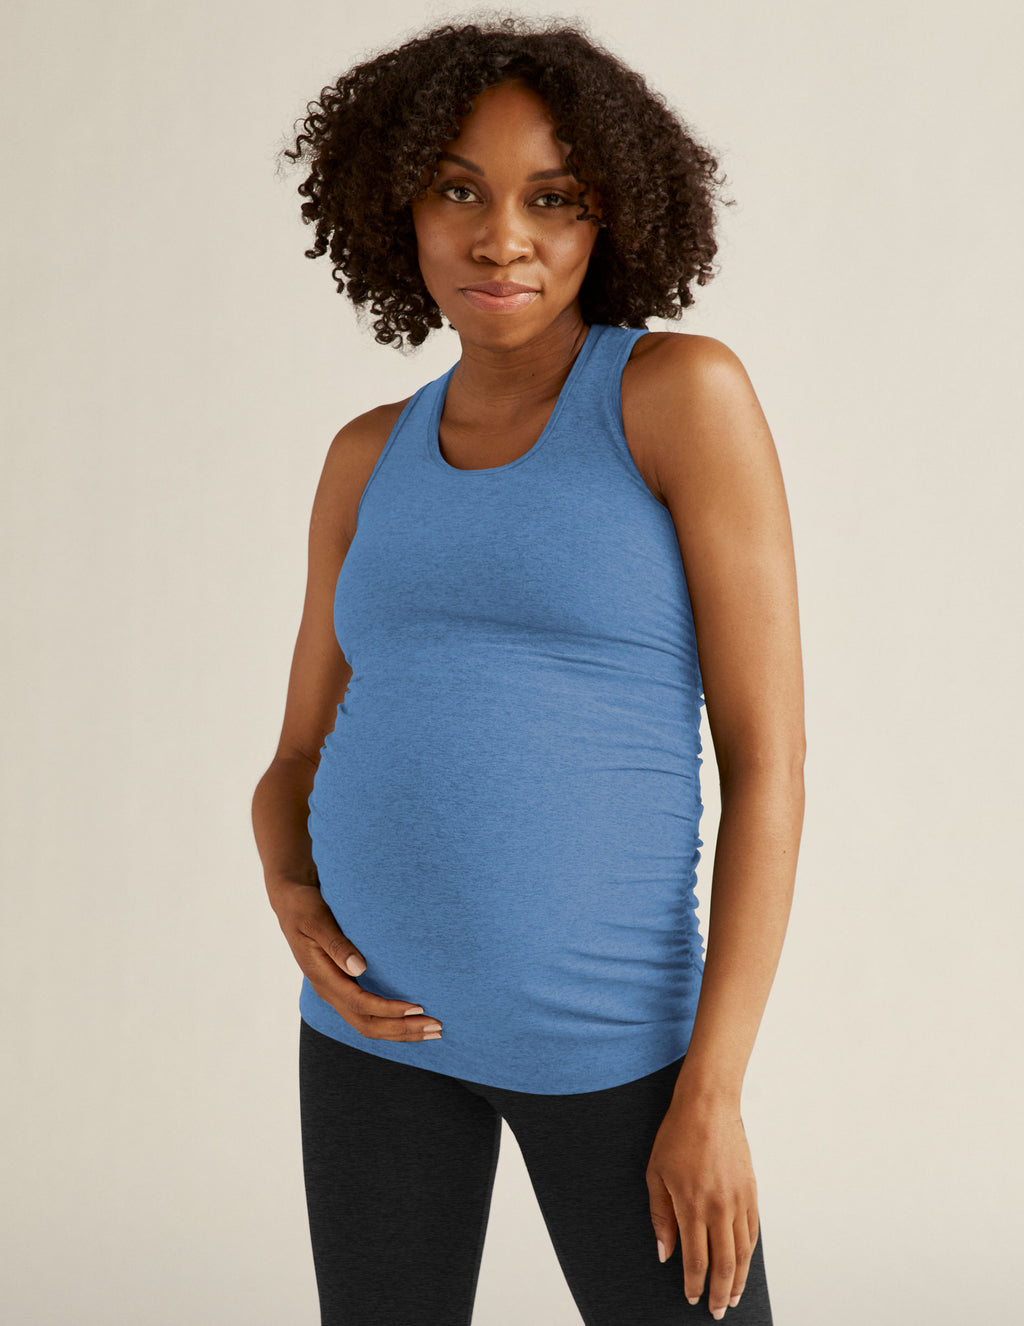 Spacedye Bases Covered Maternity Tank Featured Image